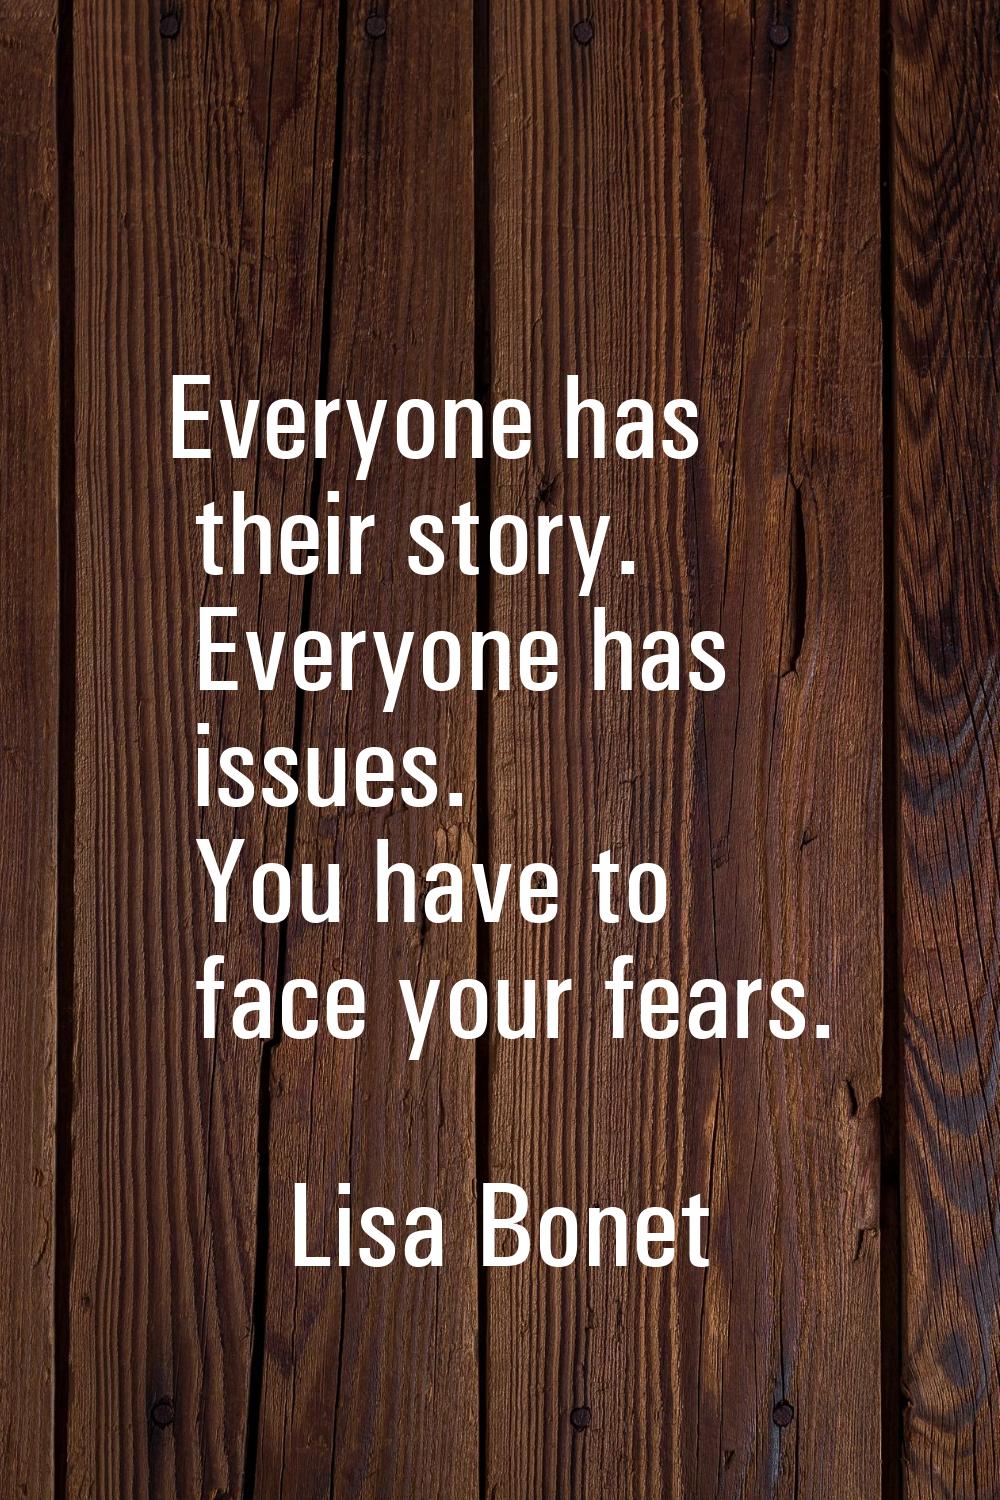 Everyone has their story. Everyone has issues. You have to face your fears.